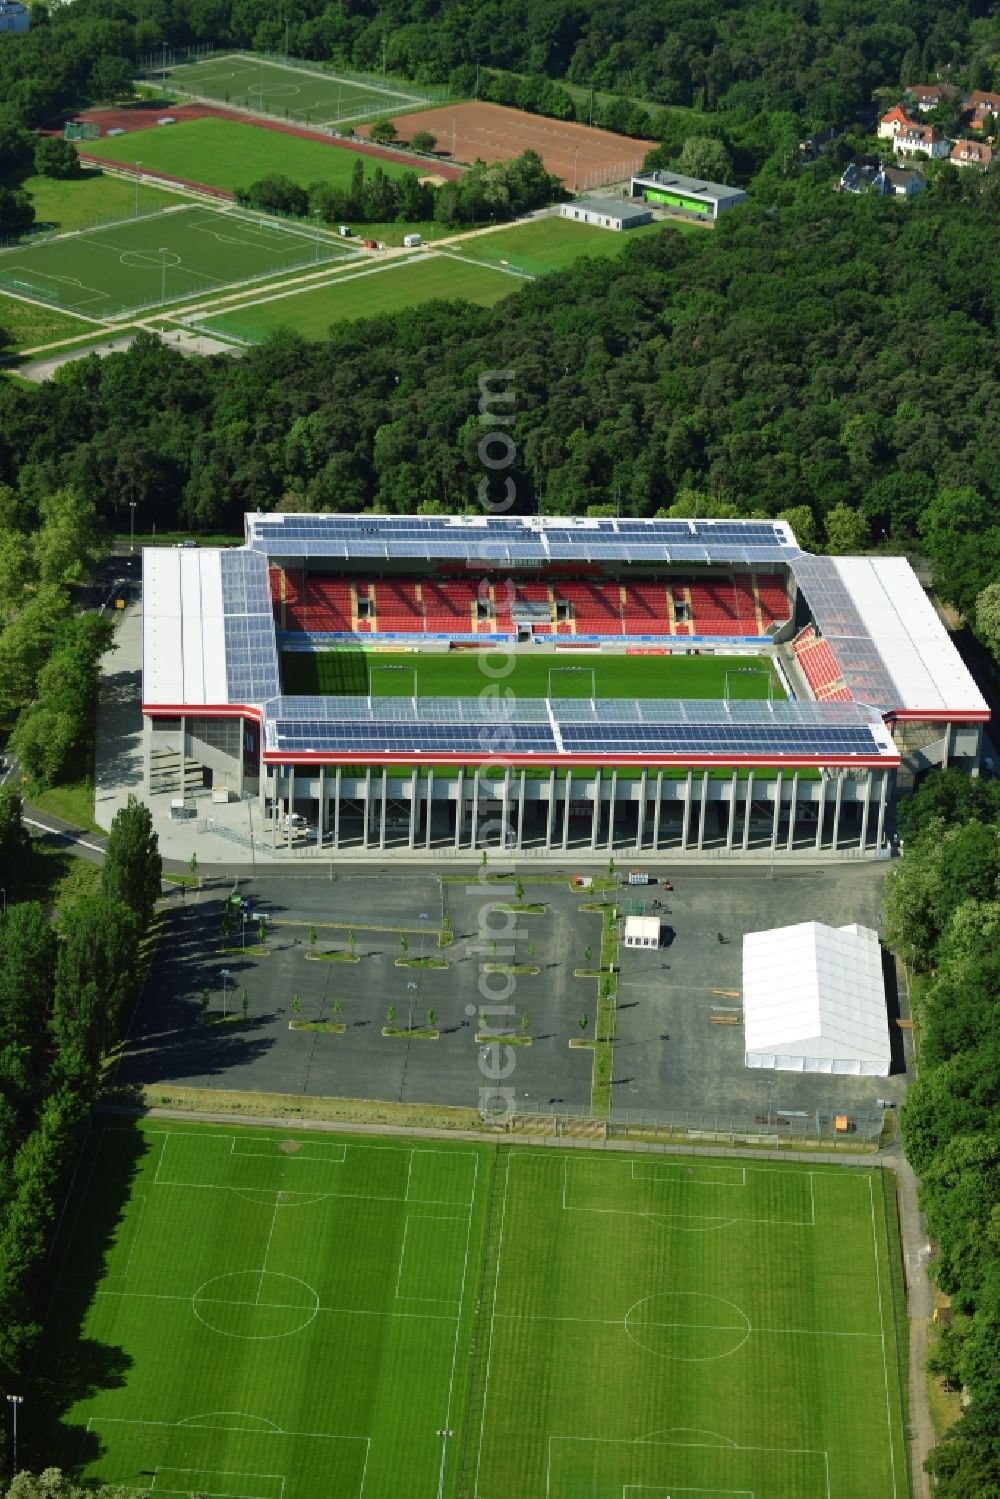 Aerial image Offenbach - View of the Sparda-Bank-Hessen stadium in Offenbach in Hesse. The soccer stadium, in which the soccer club Kickers Offenbach plays its home games, was rebuilt after the demolition of the stadium Bieberer Berg at the same location with a higher capacity of 20,500 seats. Under the leadership of the newly formed stadium company Bieberer Berg (SBB), the stadium was built in February 2011 and celebrated its opening in July 2012